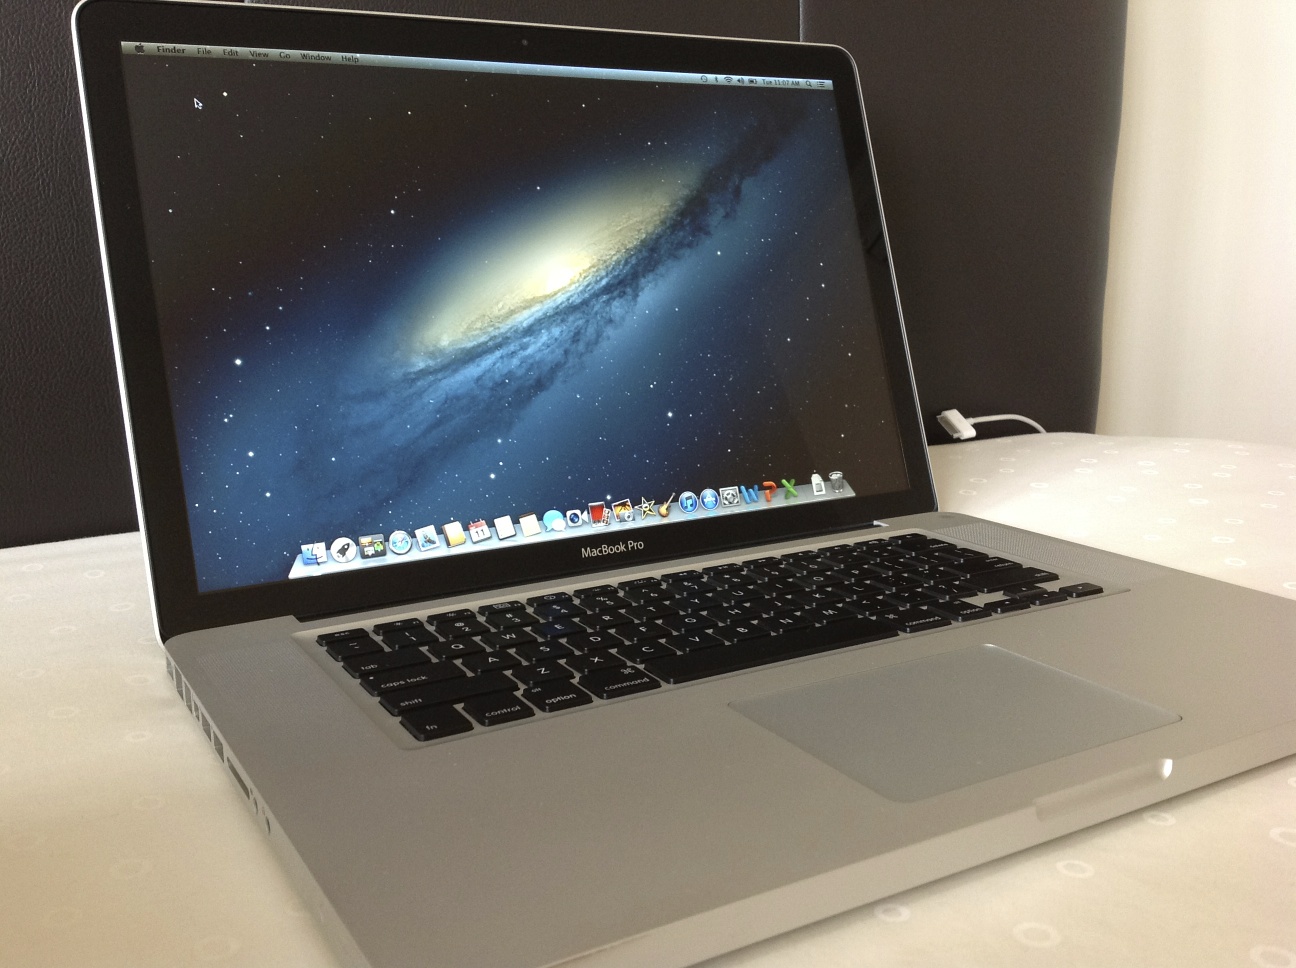 there is an apple macbook pro laptop sitting on a table